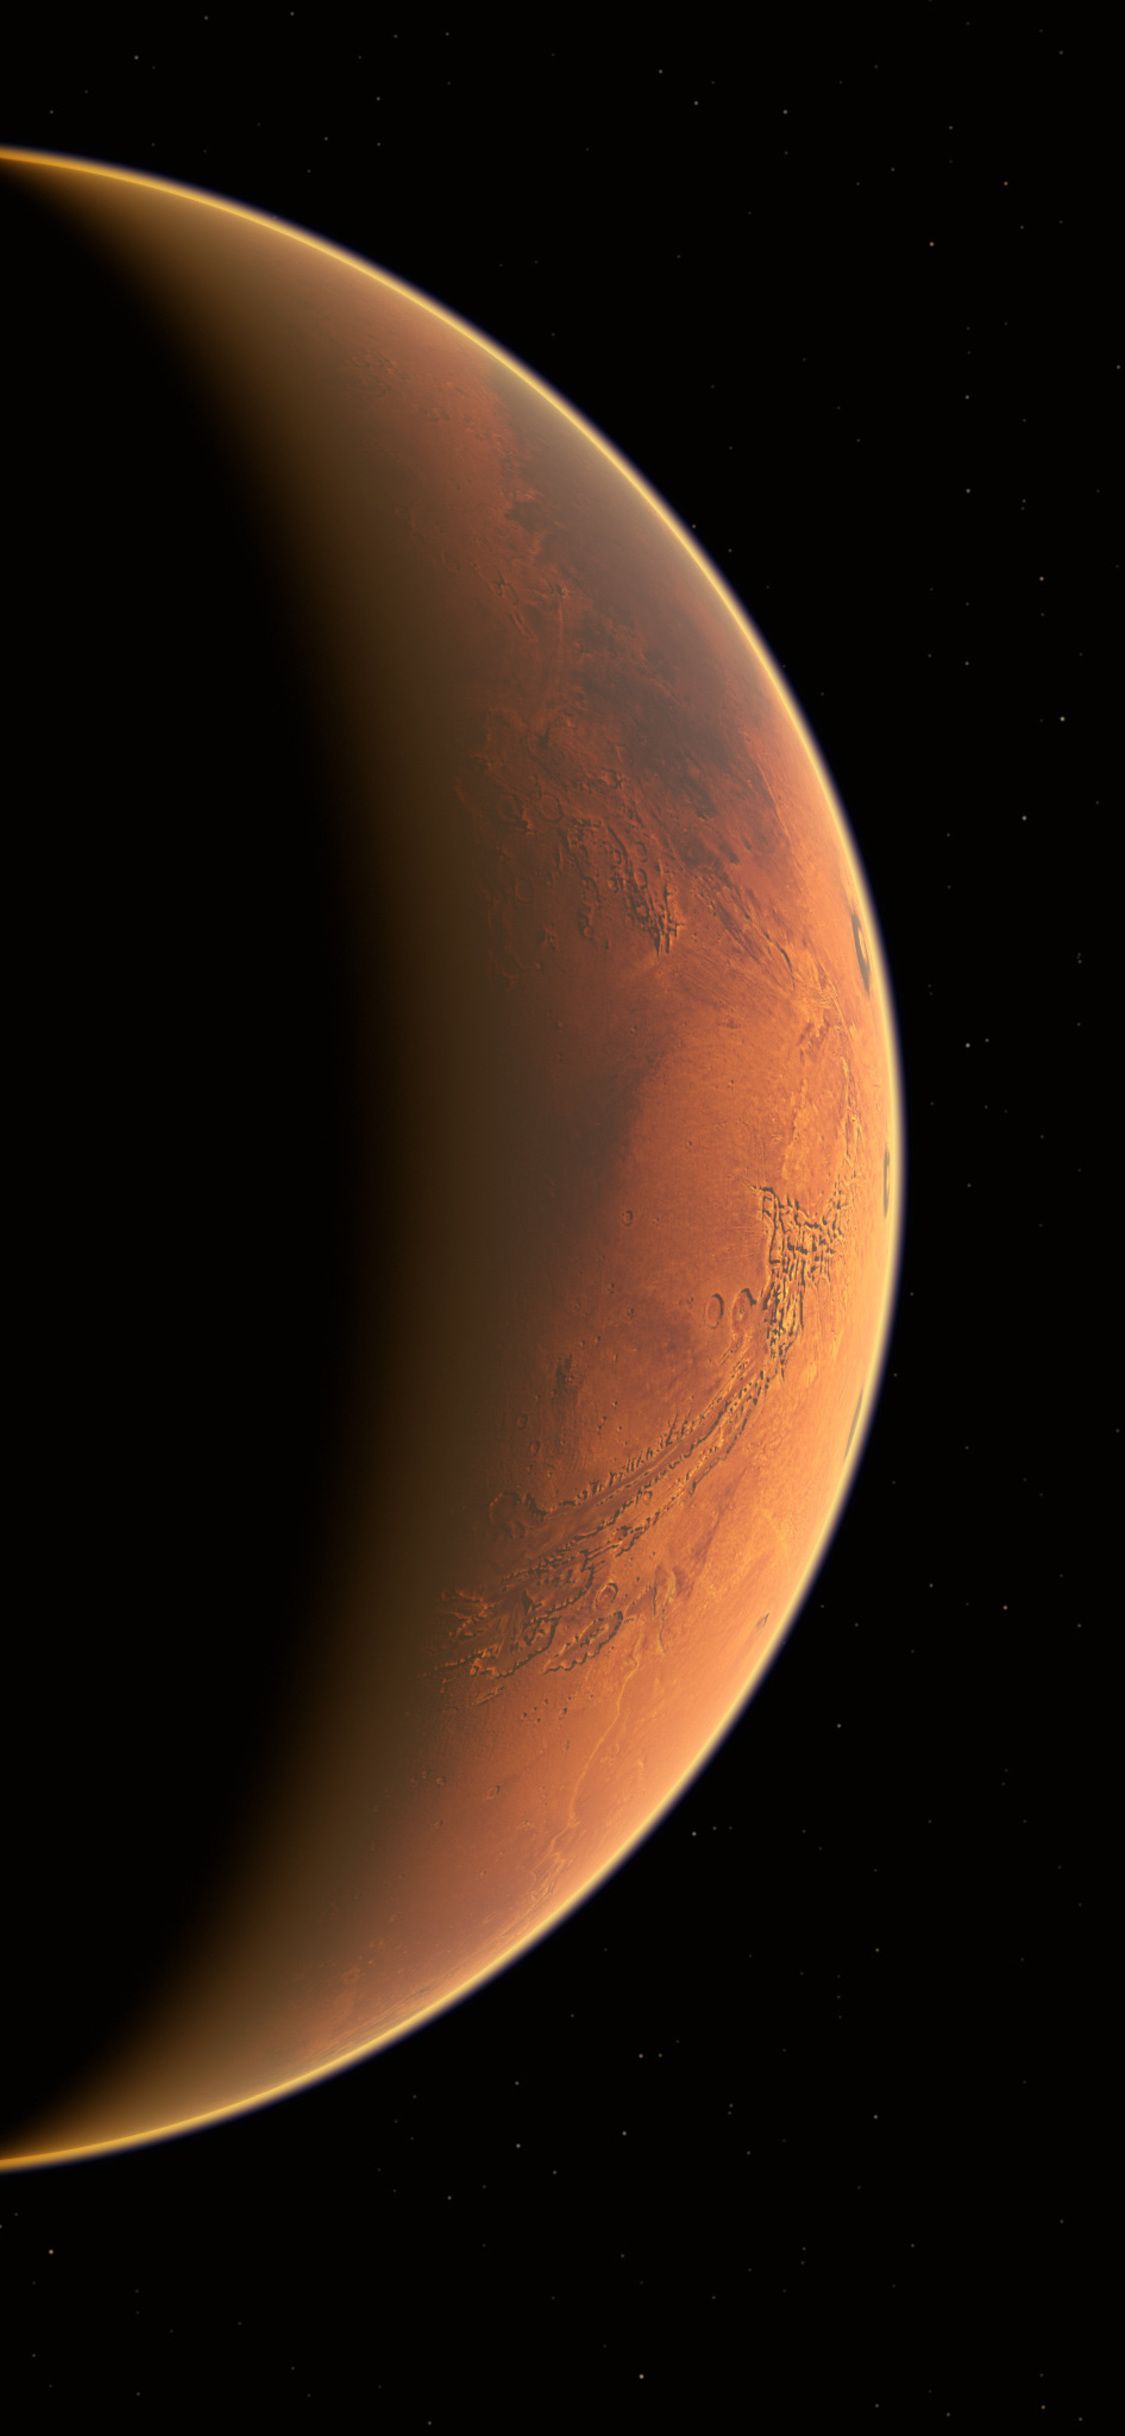 A new iPhone wallpaper of Mars from NASA - Mars